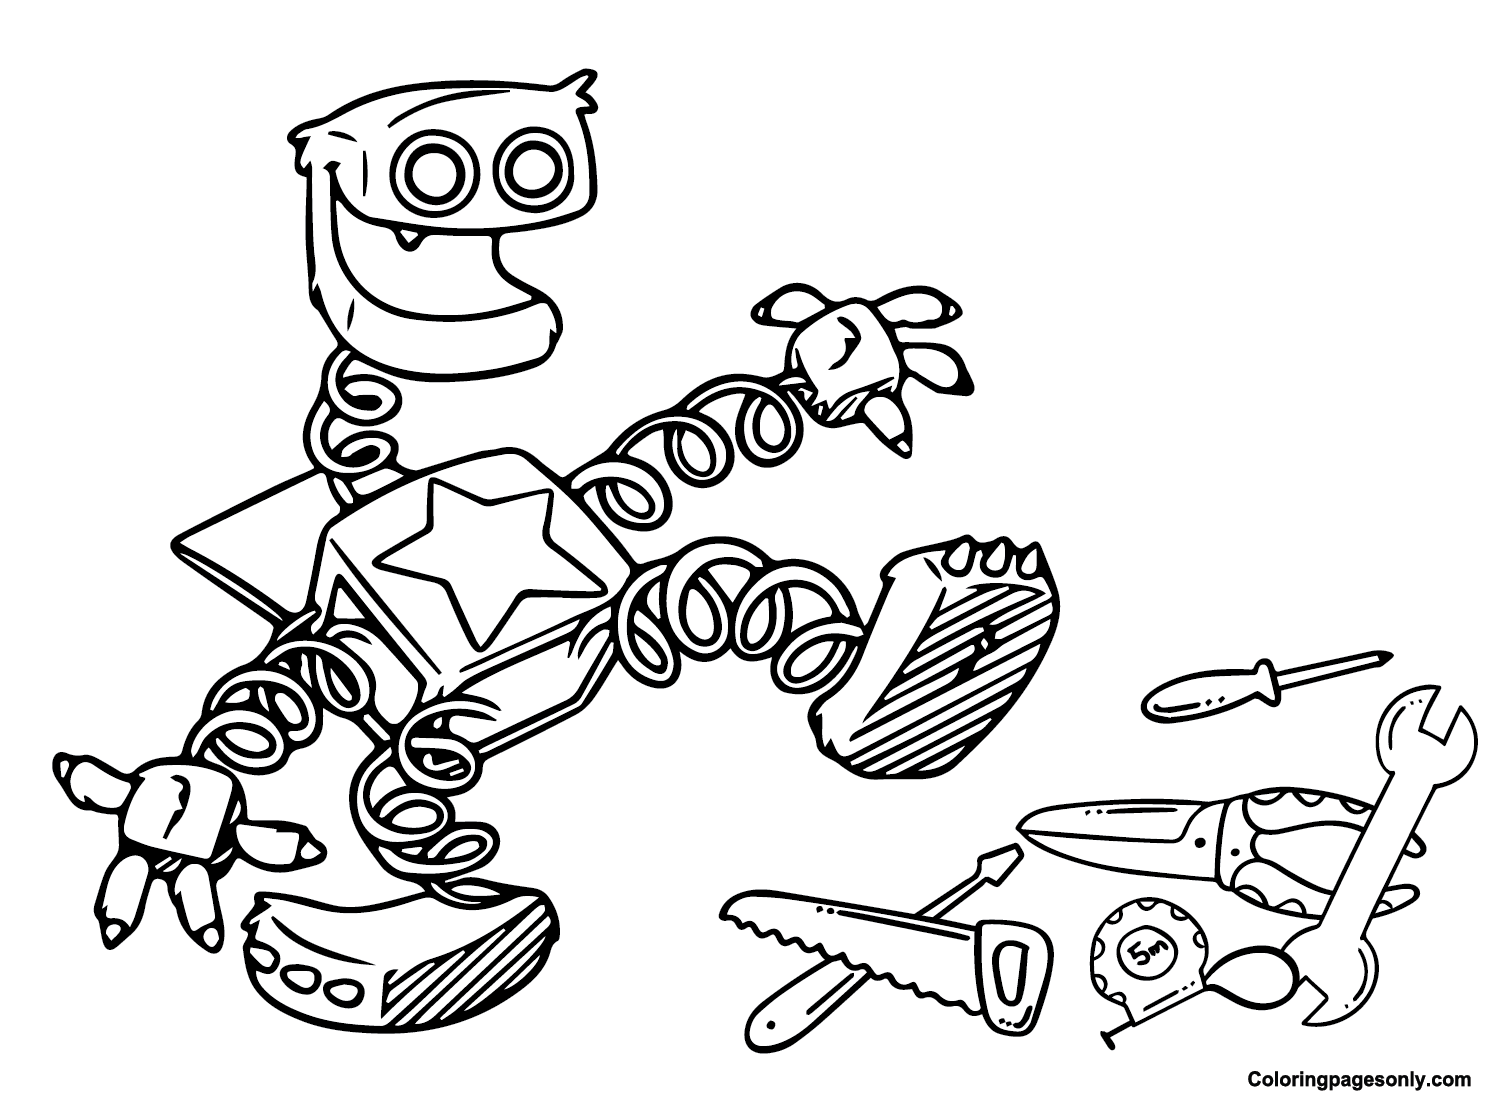 Funny Boxy Boo Coloring Page